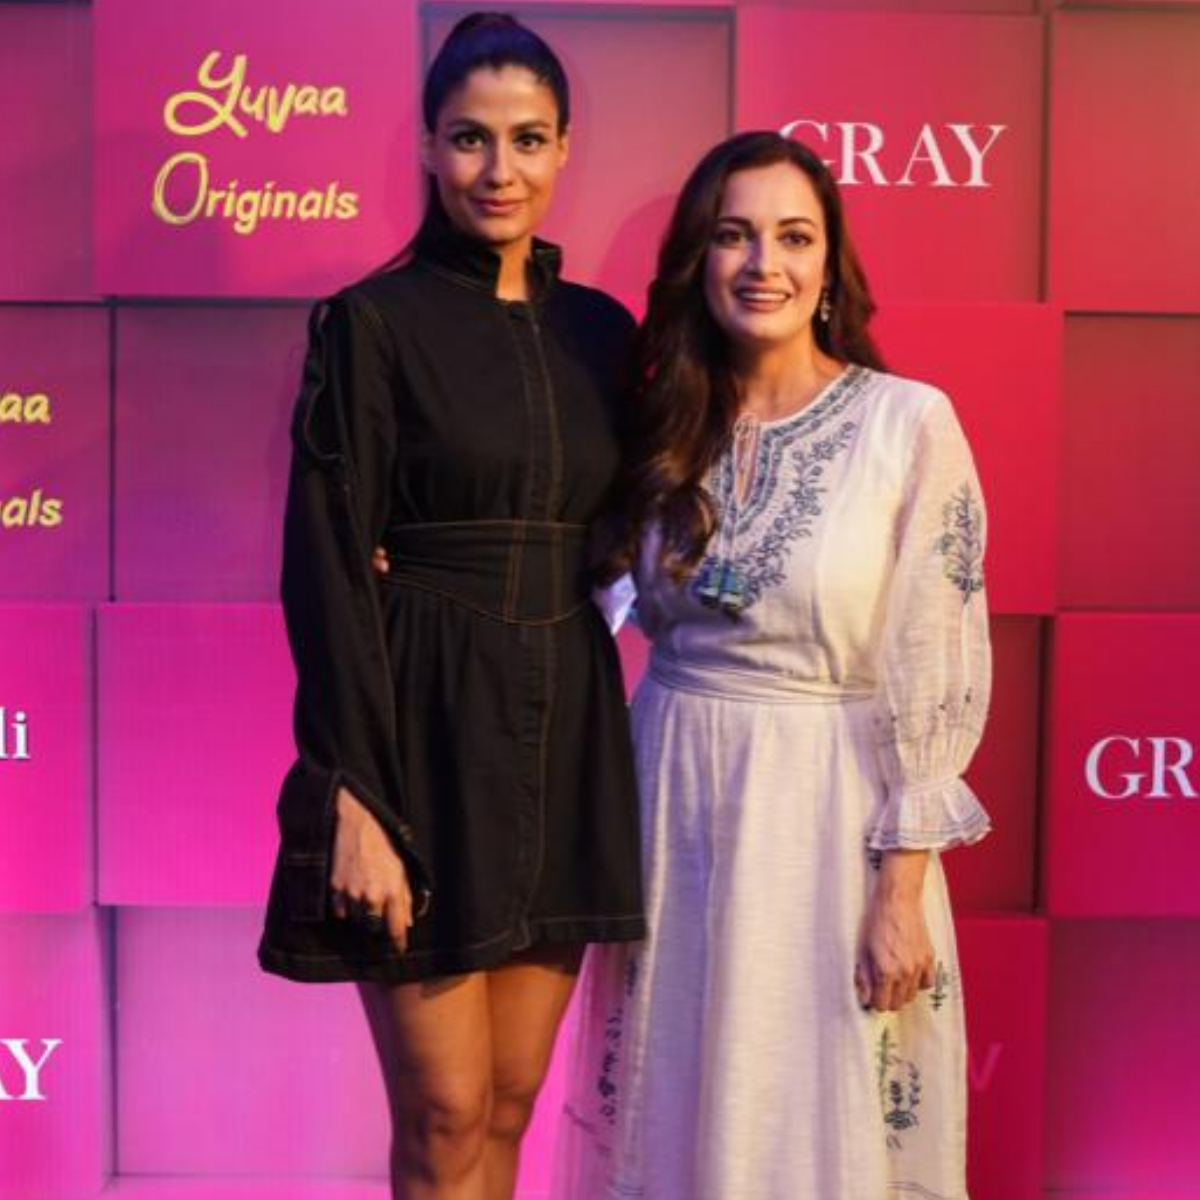 Exclusive: Dia Mirza, Shreya Dhanwanthary get candid on short film Gray, consent & inclusive storytelling 